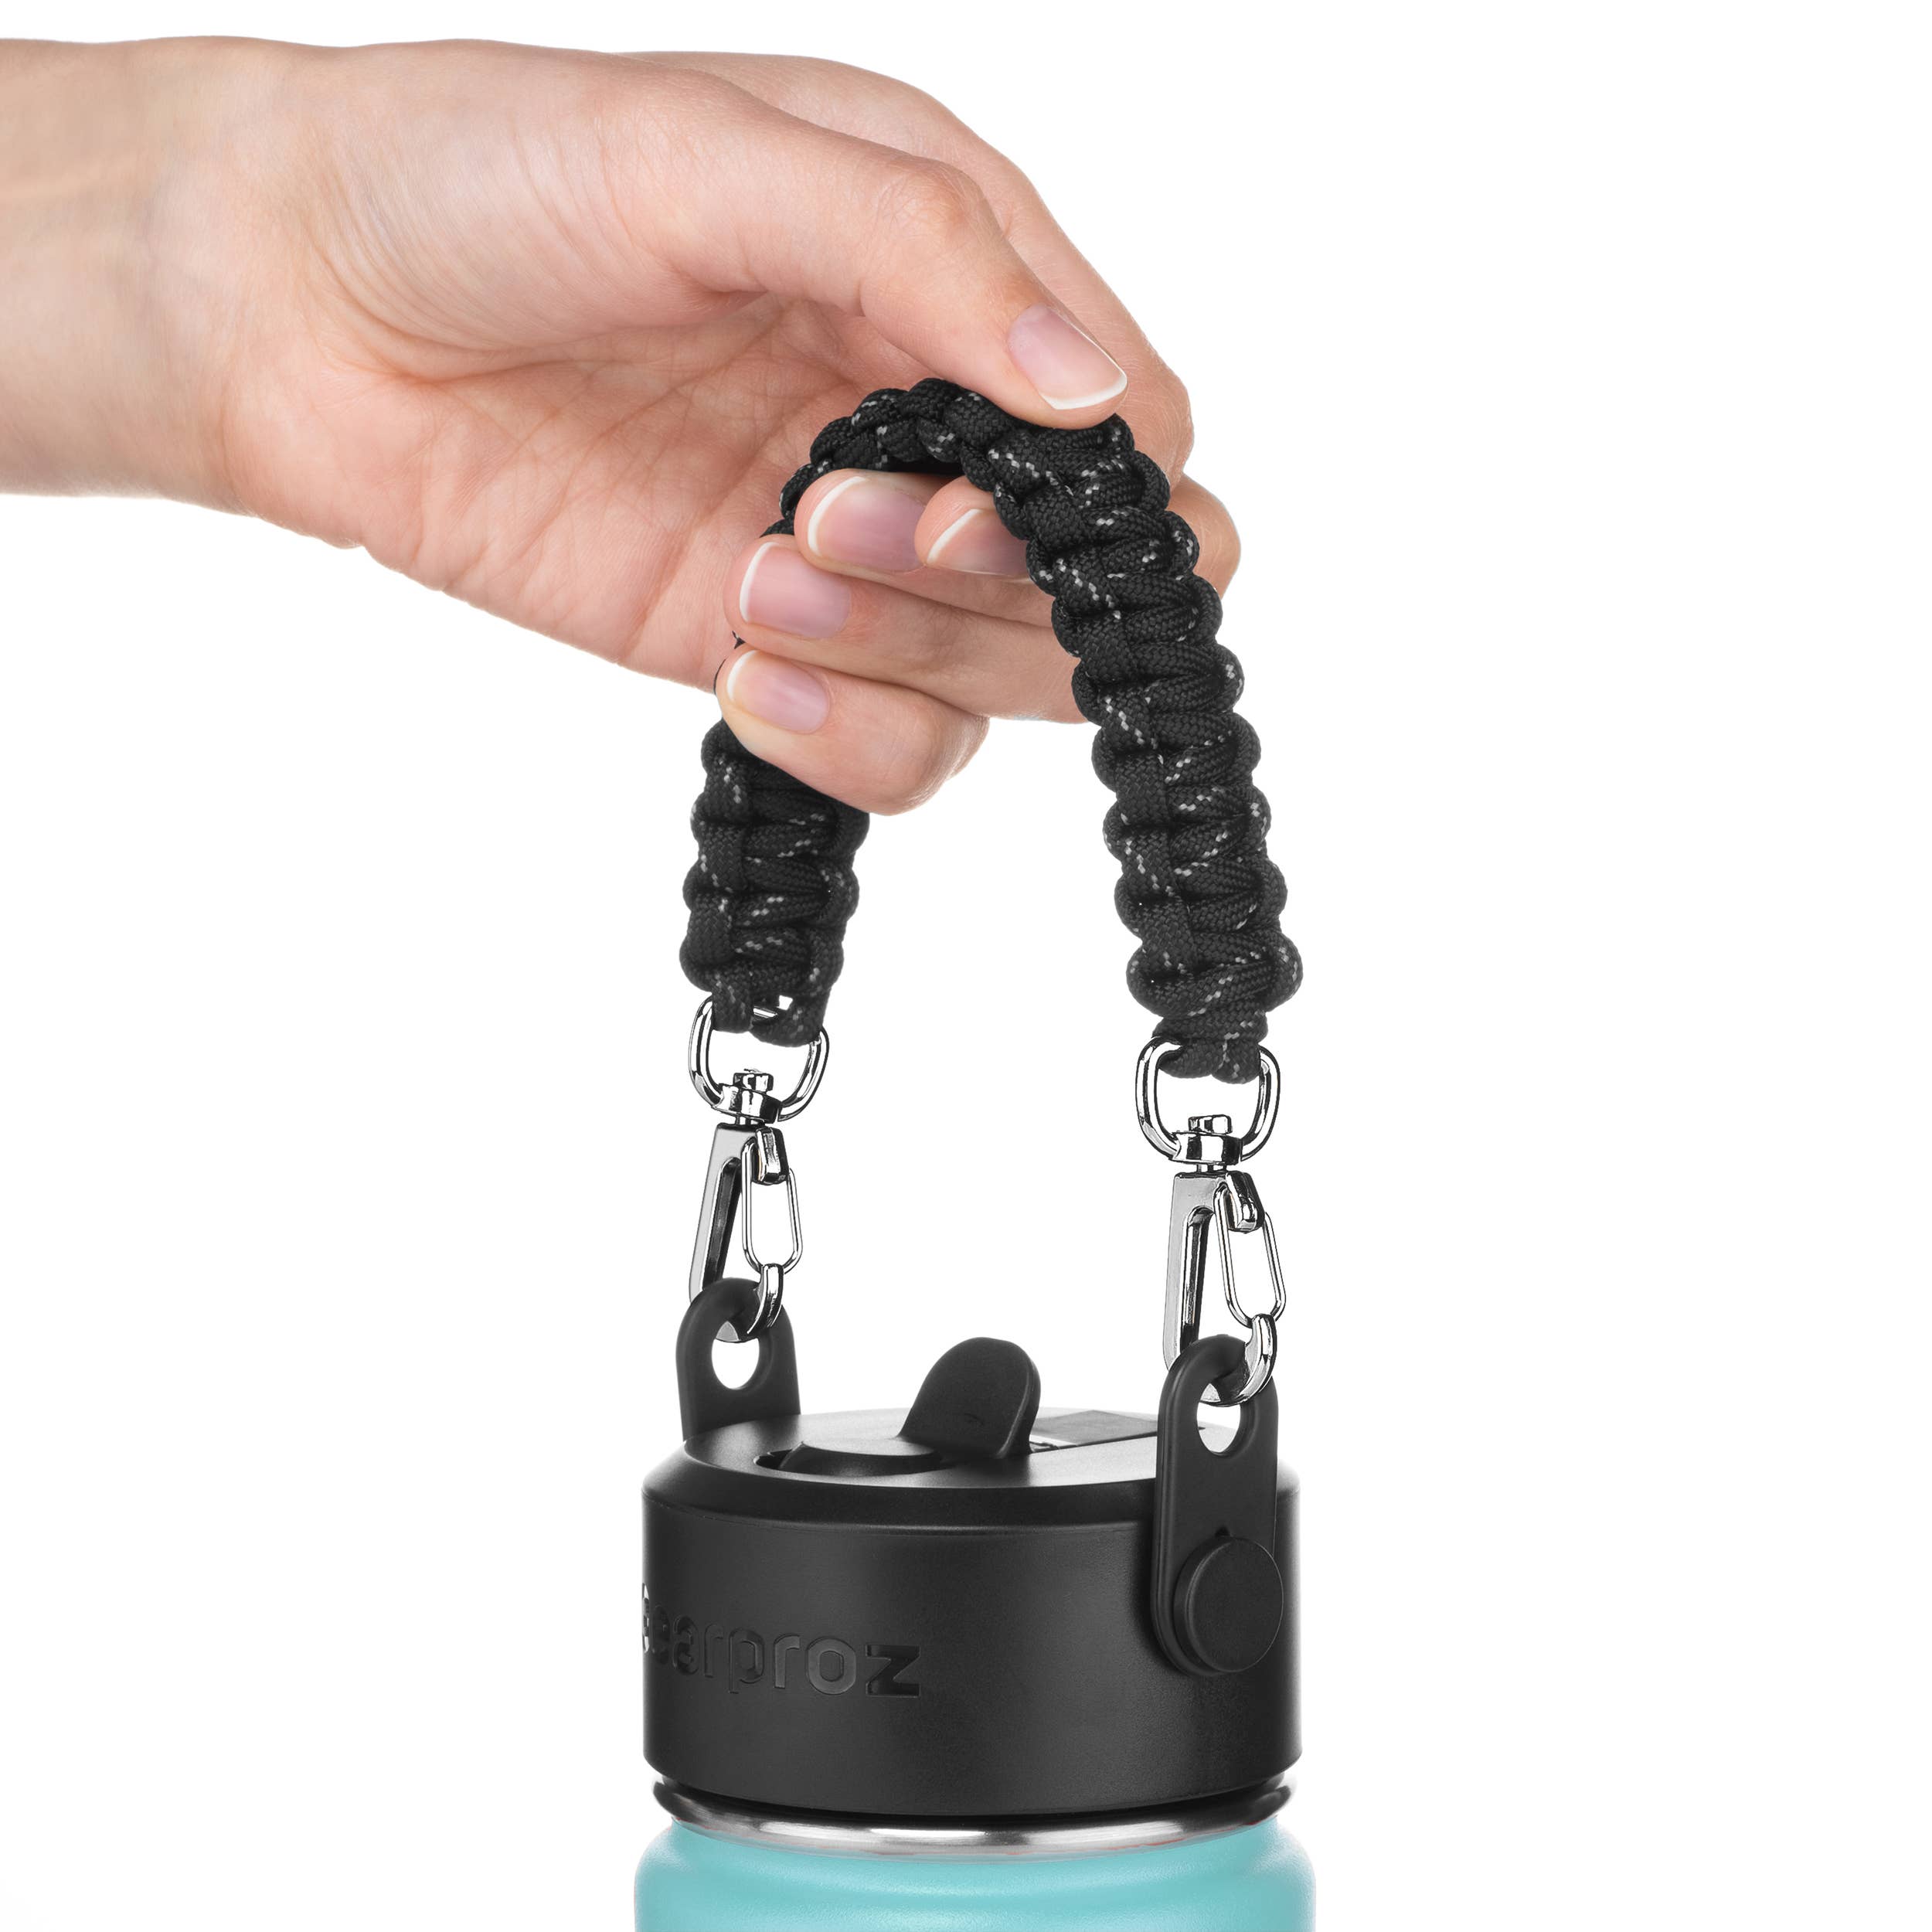 Hydroflask Handle, Hydrocord Paracord Strap for Wide Mouth Water Bottles  With Safety Ring and Carabiner Clip 